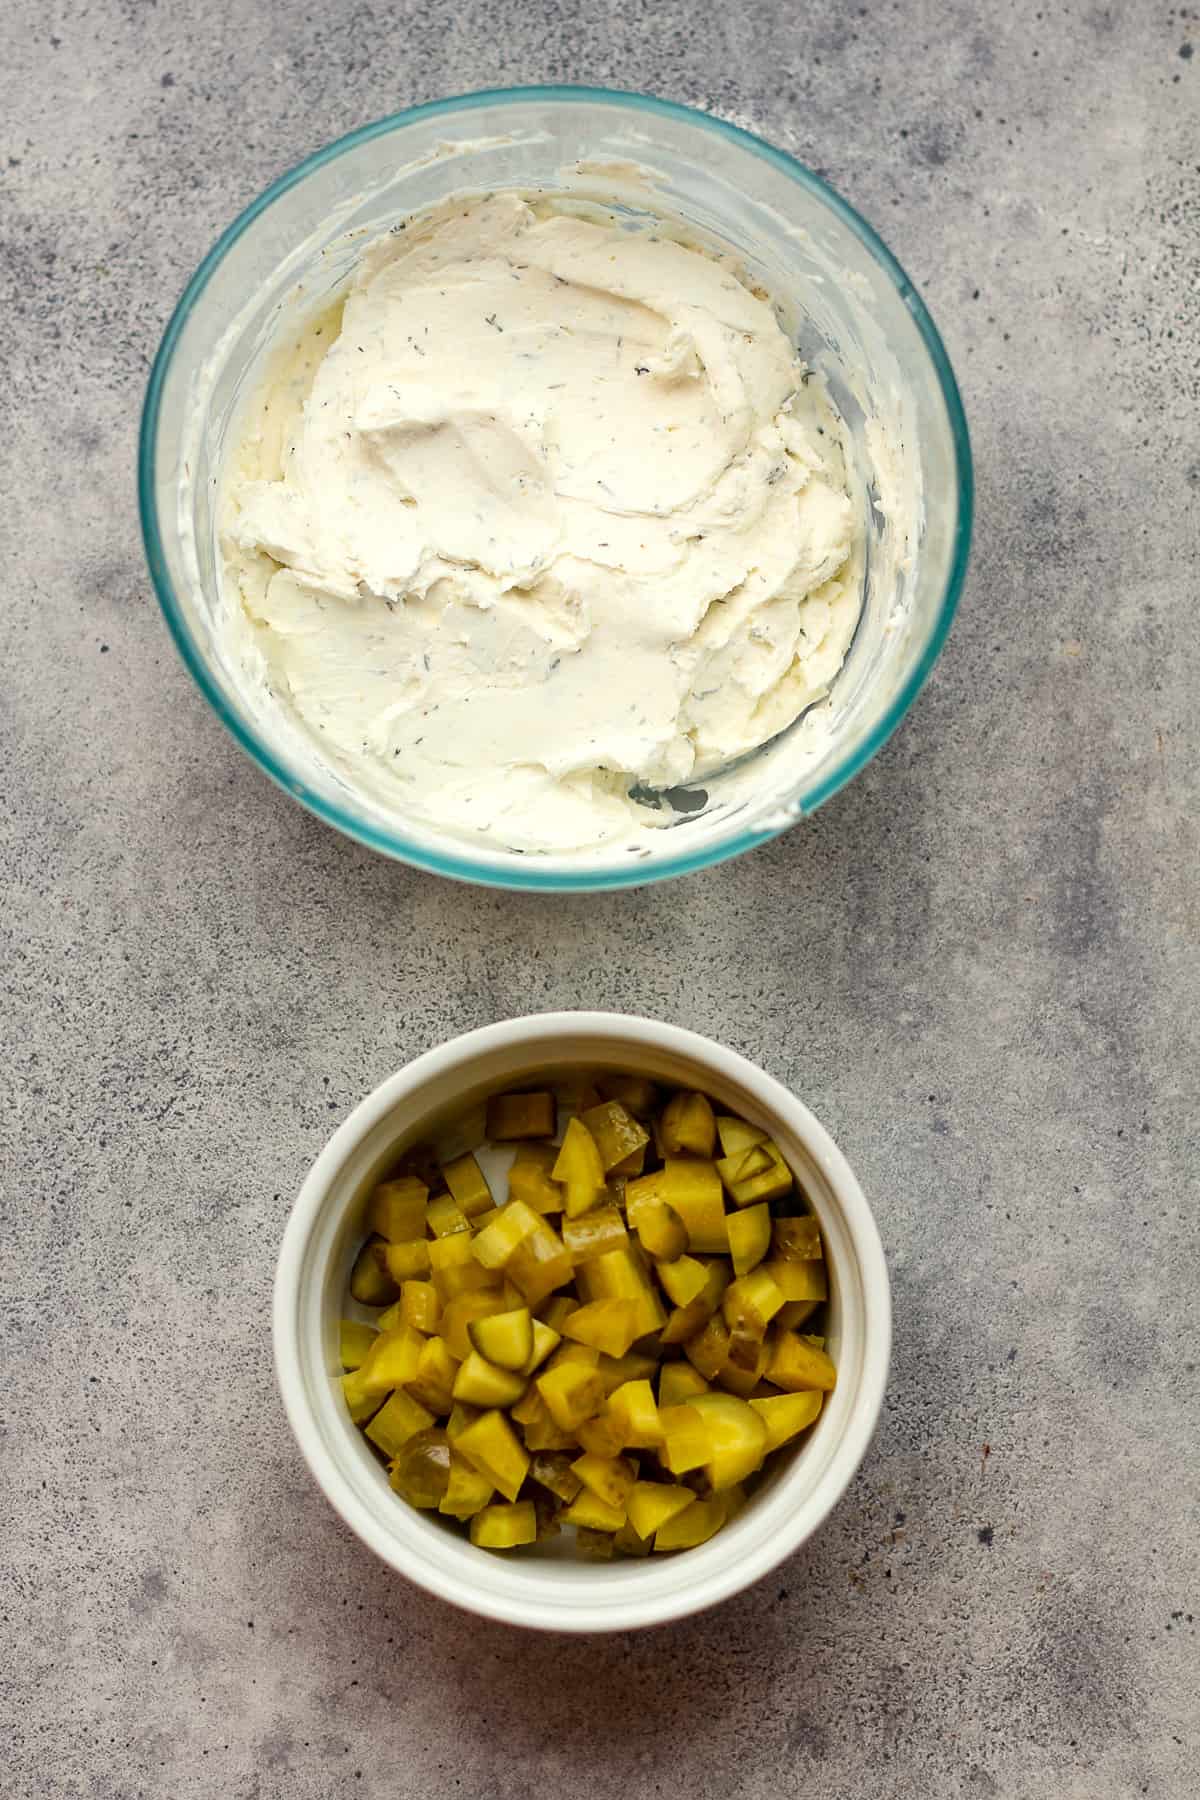 A bowl of the cream cheese mixture and a bowl of the diced dill pickles.